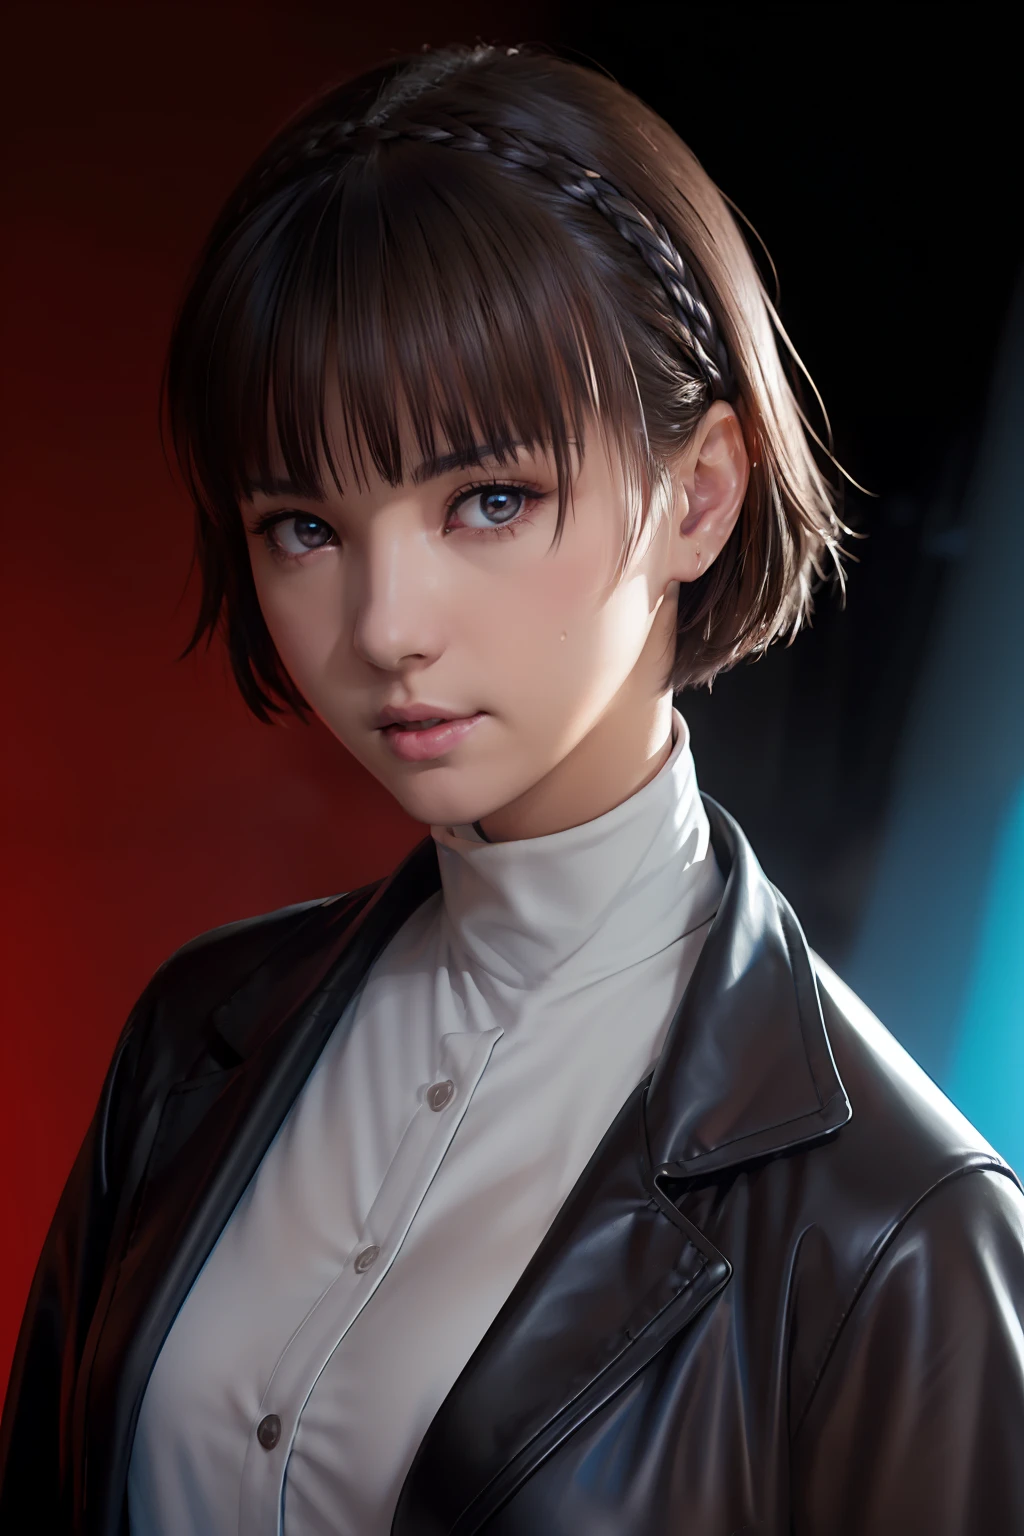 (((raw photo,8k))),(photorealistic:1.3),(masterpiece), (best quality), ultra high res, (best illustration), photon mapping, radiosity, best shadow, portrait, (solo:1.5),1girl,(Niijima Makoto), ((angry expression)), (brown short hair with bangs), ((wearing a soft brown overcoat and a white shirt )), beautiful detailed red eyes, medium breasts, (((black background, blue lighiting, blue backlighting, studio lighting))), looking at viewer, smooth, film, photographed with a Fujifilm XT3, Fujicolor, Fujifilm 35mm f/1.4G lens, with CYBERPUNK 0T COLOR FILM 36EXP 35MM CINE FILM